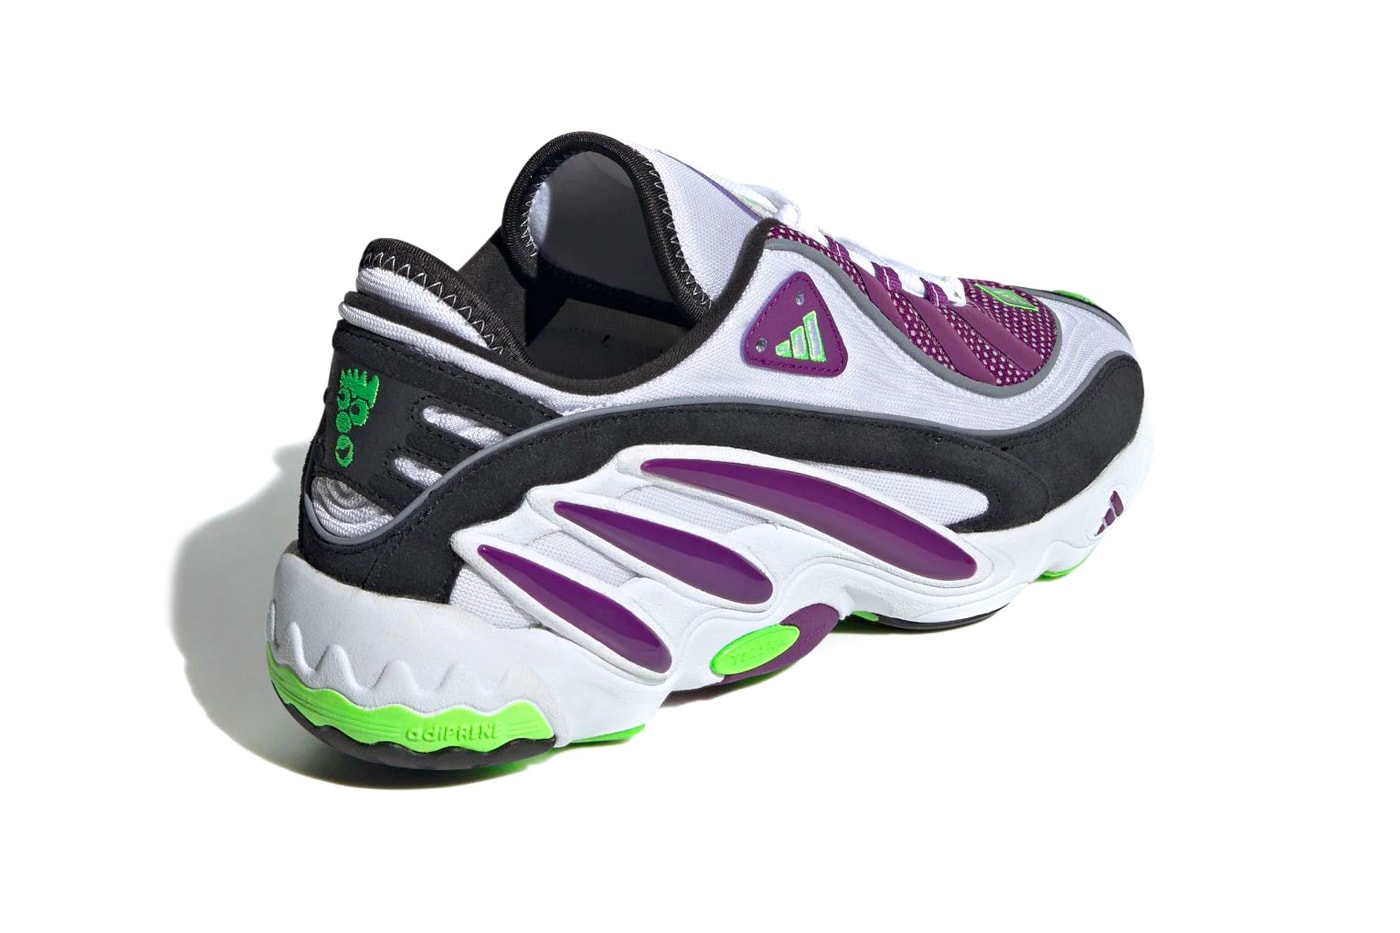 adidas FYW 98 Gray Two Signal Coral Glory Purple Solar Green FOOTWEAR WHITE YELLOW TINT footwear sneakers shoes kicks runners trainers fall winter 2020 collection three stripes